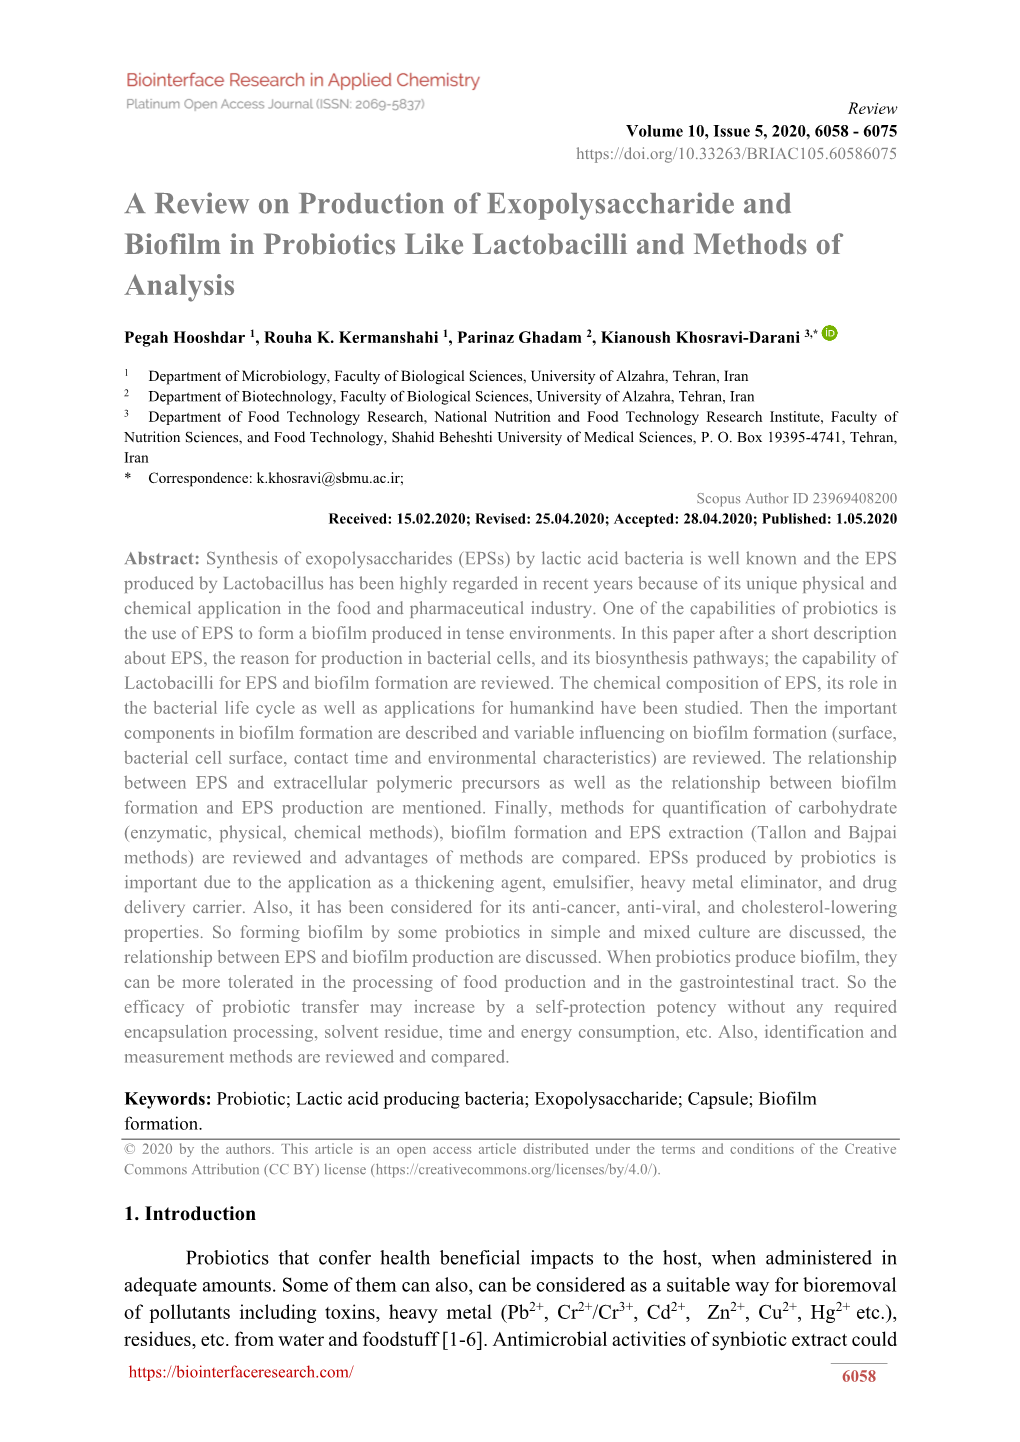 A Review on Production of Exopolysaccharide and Biofilm in Probiotics Like Lactobacilli and Methods of Analysis